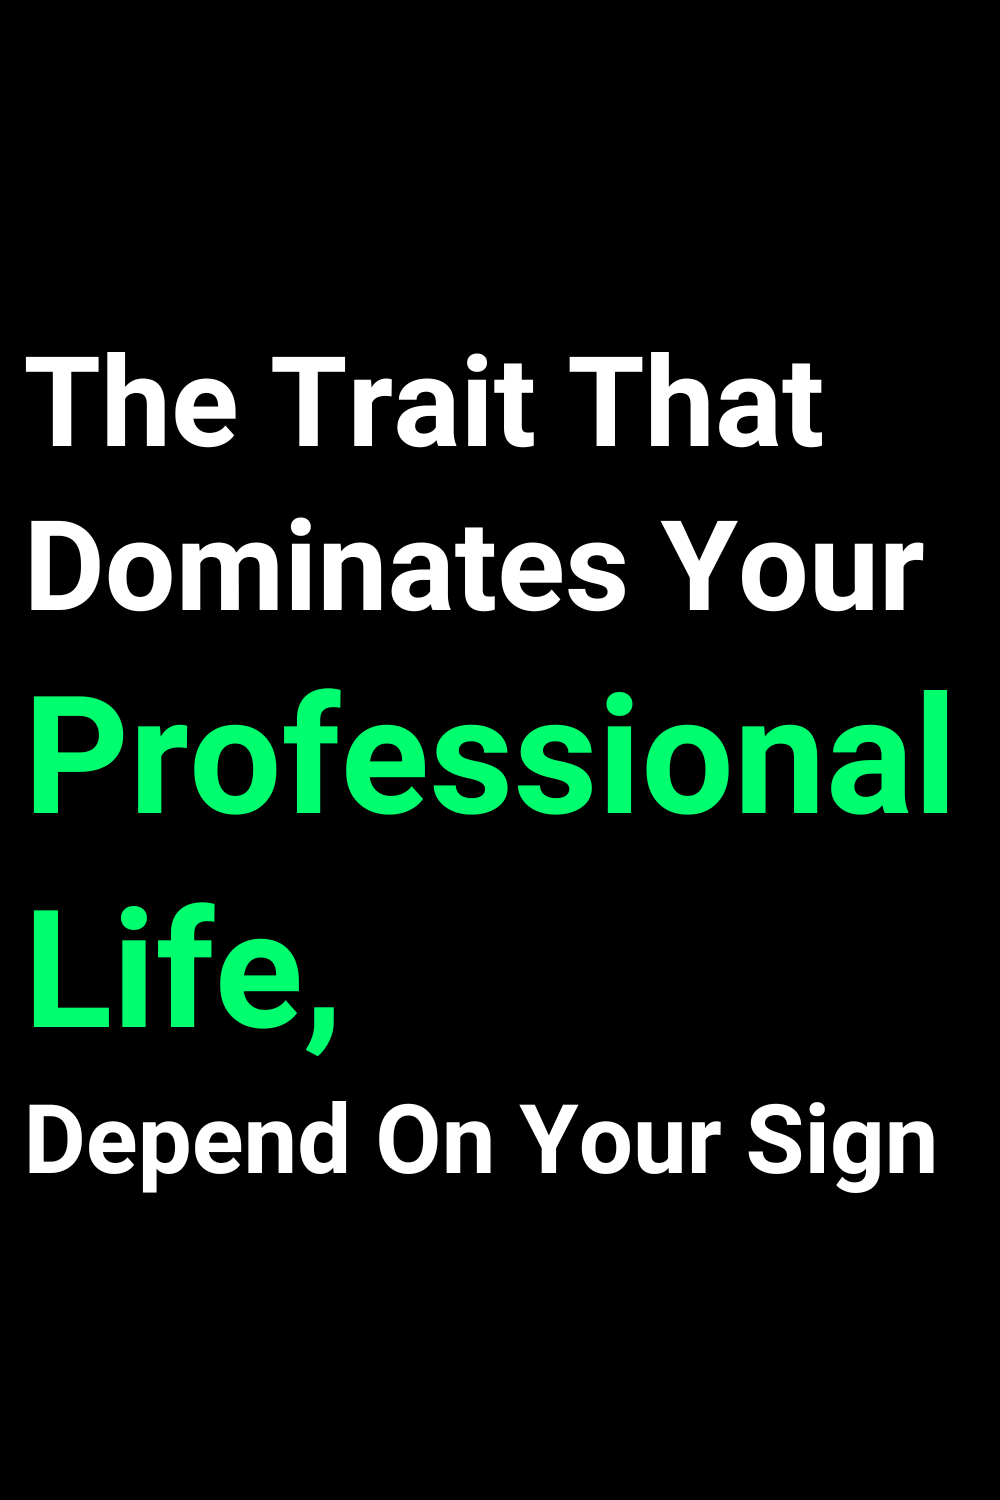 The Trait That Dominates Your Professional Life, Depend On Your Sign